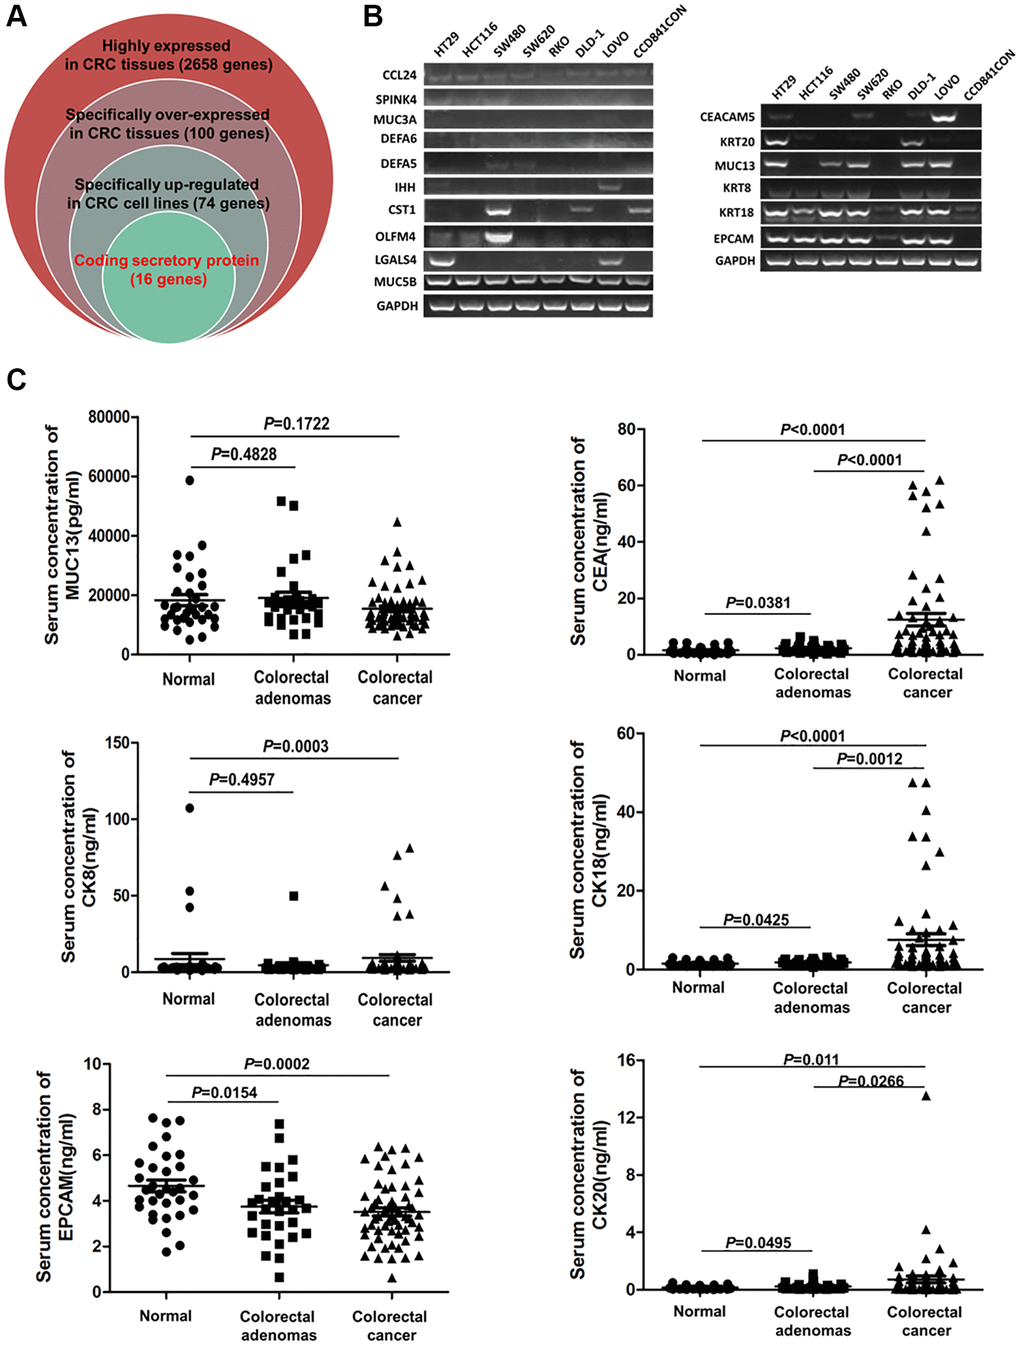 The serum levels of CEA, CK18, CK20, CK8, MUC13 and EPCAM in CRC, CA patients and healthy controls. (A) Screening specific genes that encode secretory proteins in CRC by bioinformatics. (B) Testing the expression of candidate serum biomarker genes by Q-PCR in 8 cell lines. (C) Detection of the serum levels of CEA, CK18, CK20, CK8, MUC13 and EPCAM in CRC, CA patients and healthy controls by ELISA.